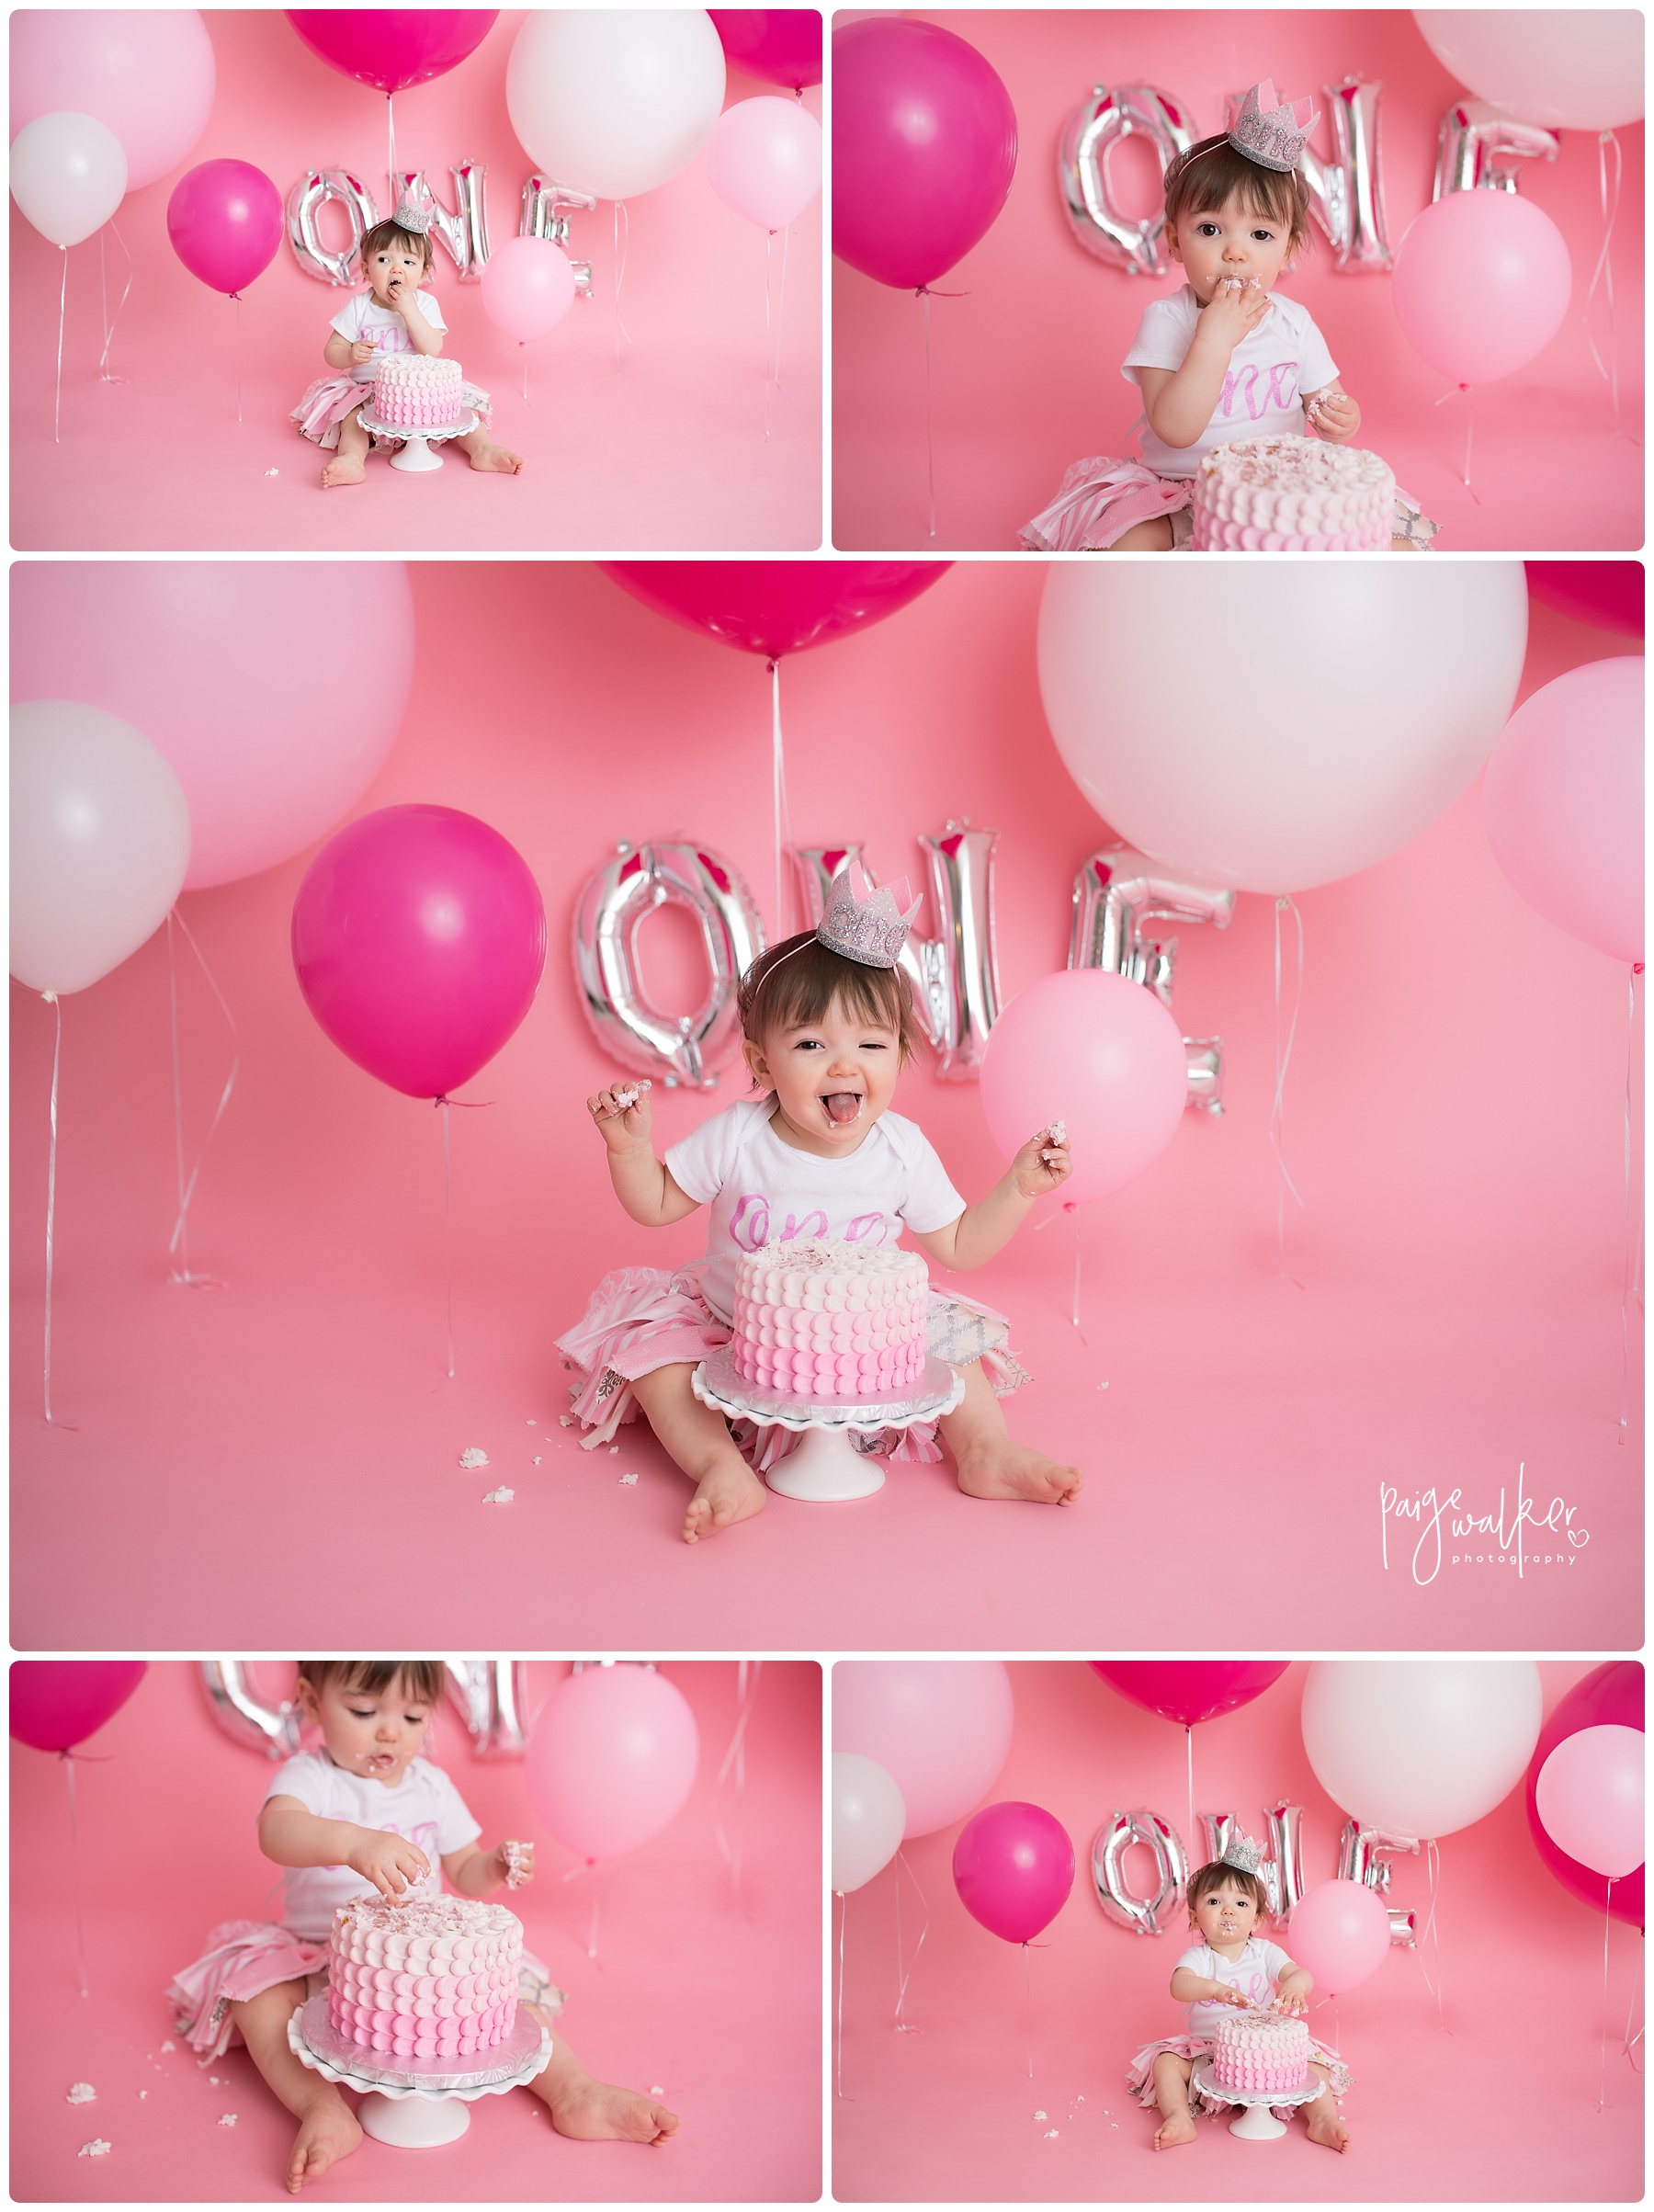 cake smash in the studio for her first birthday